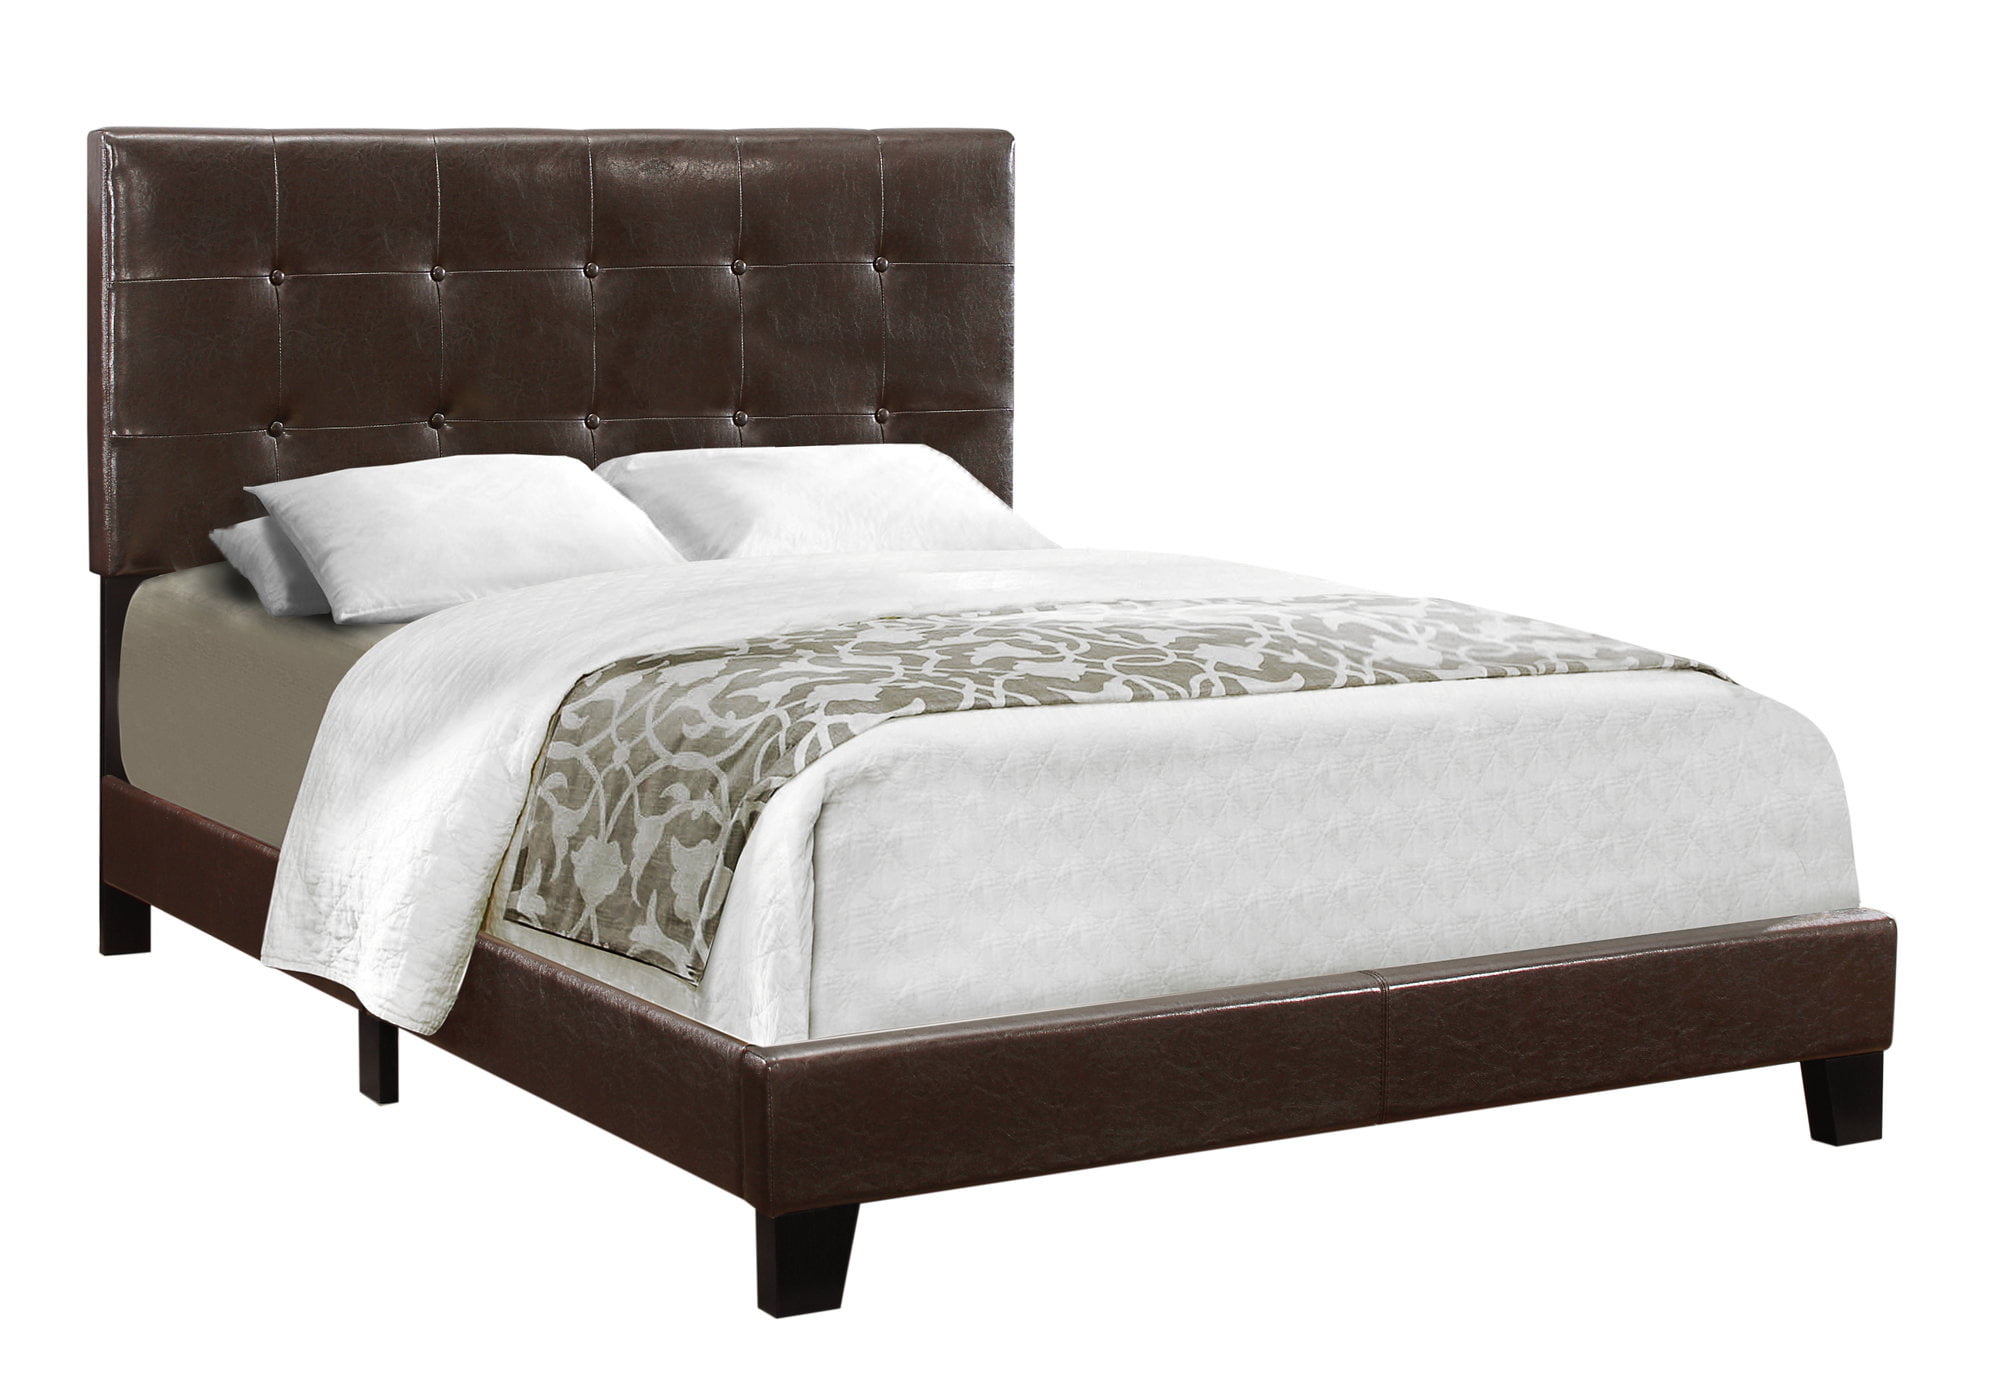 81" Chocolate Brown Contemporary Rectangular Full Size Bed ...